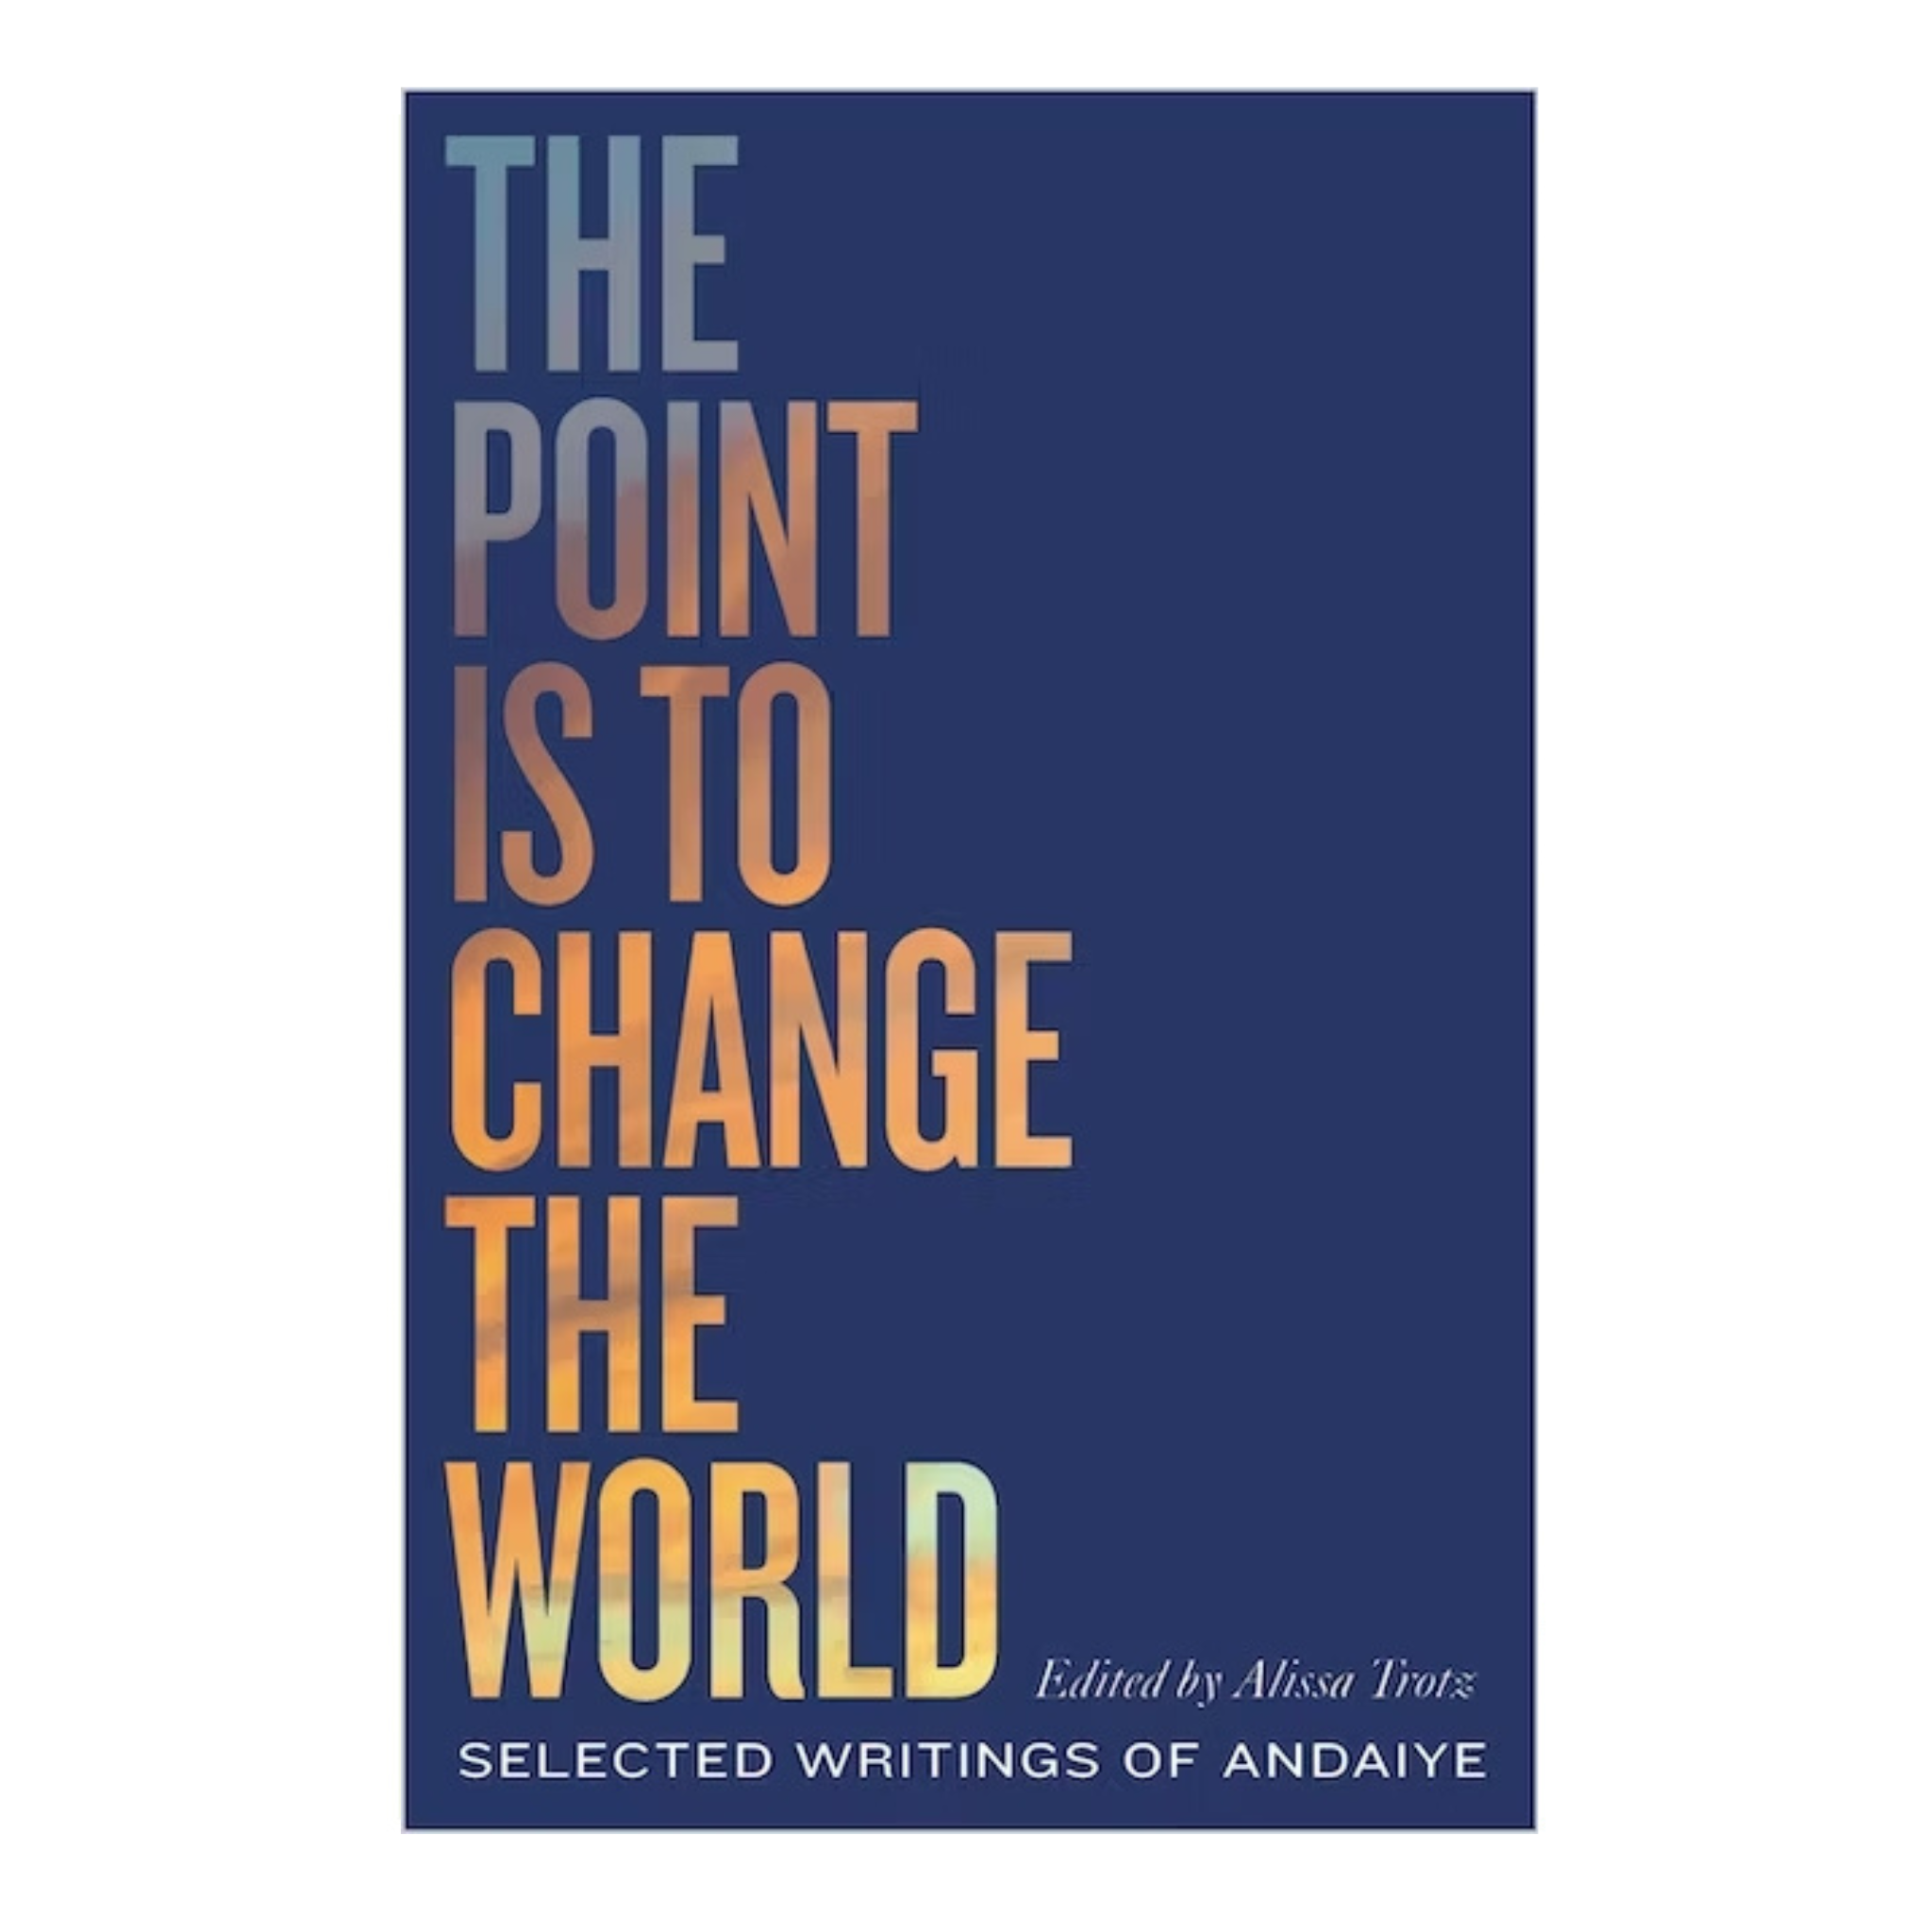 The Point is to Change the World: Selected Writings of Andaiye